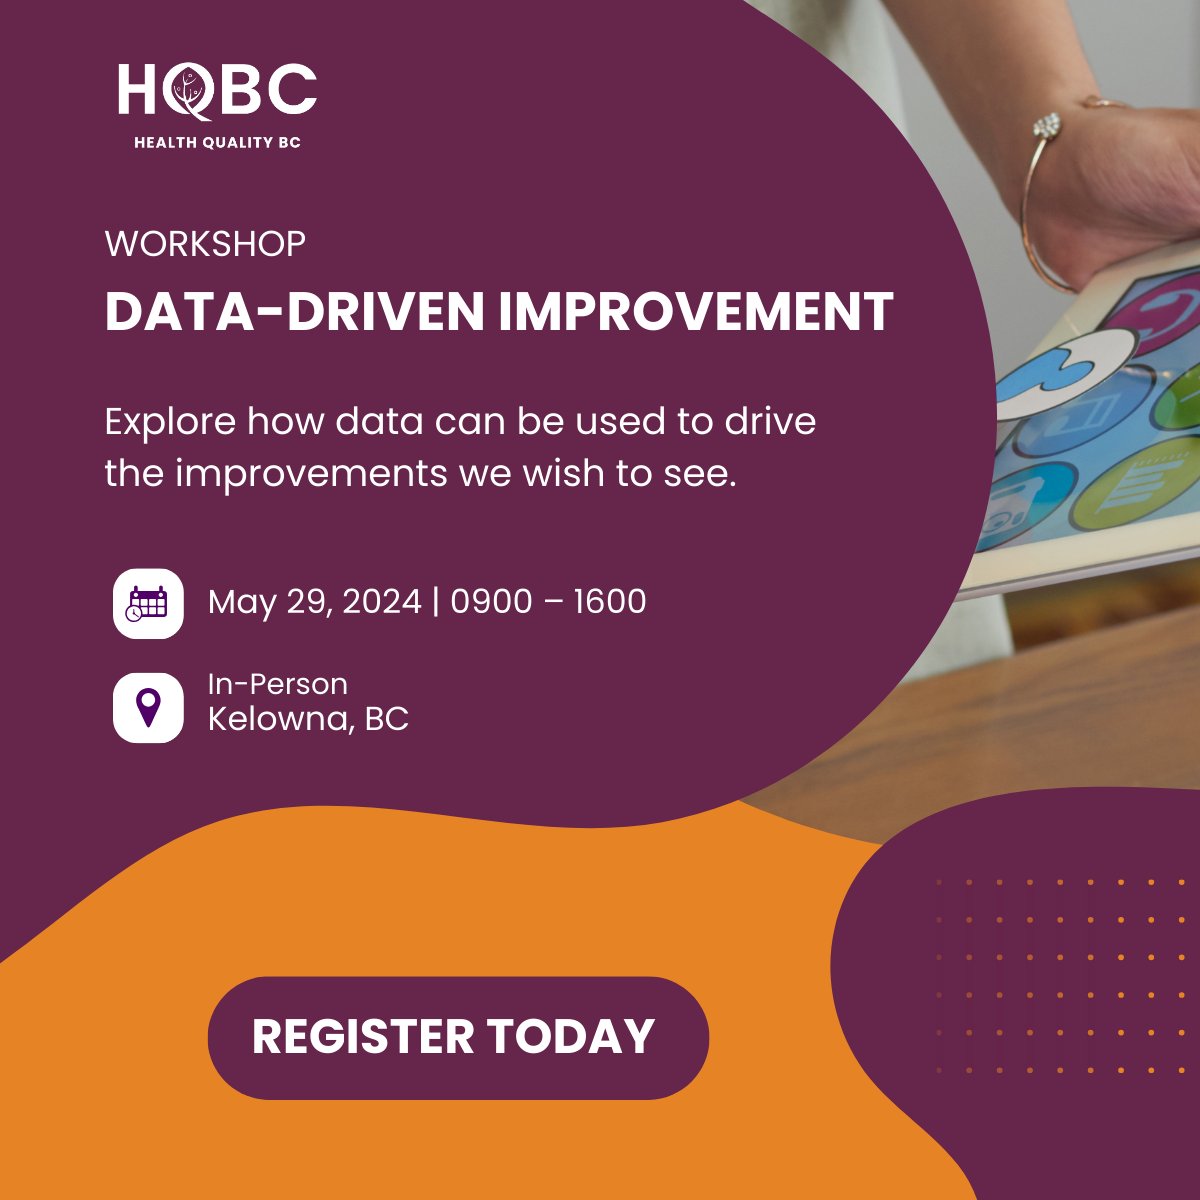 This workshop will explore how data can be used to drive the improvements we wish to see – setting up measurement systems that work, analyzing data to uncover new insights and monitoring improvements over time. Register to join us May 29 in Kelowna ow.ly/bMAj50RubR7